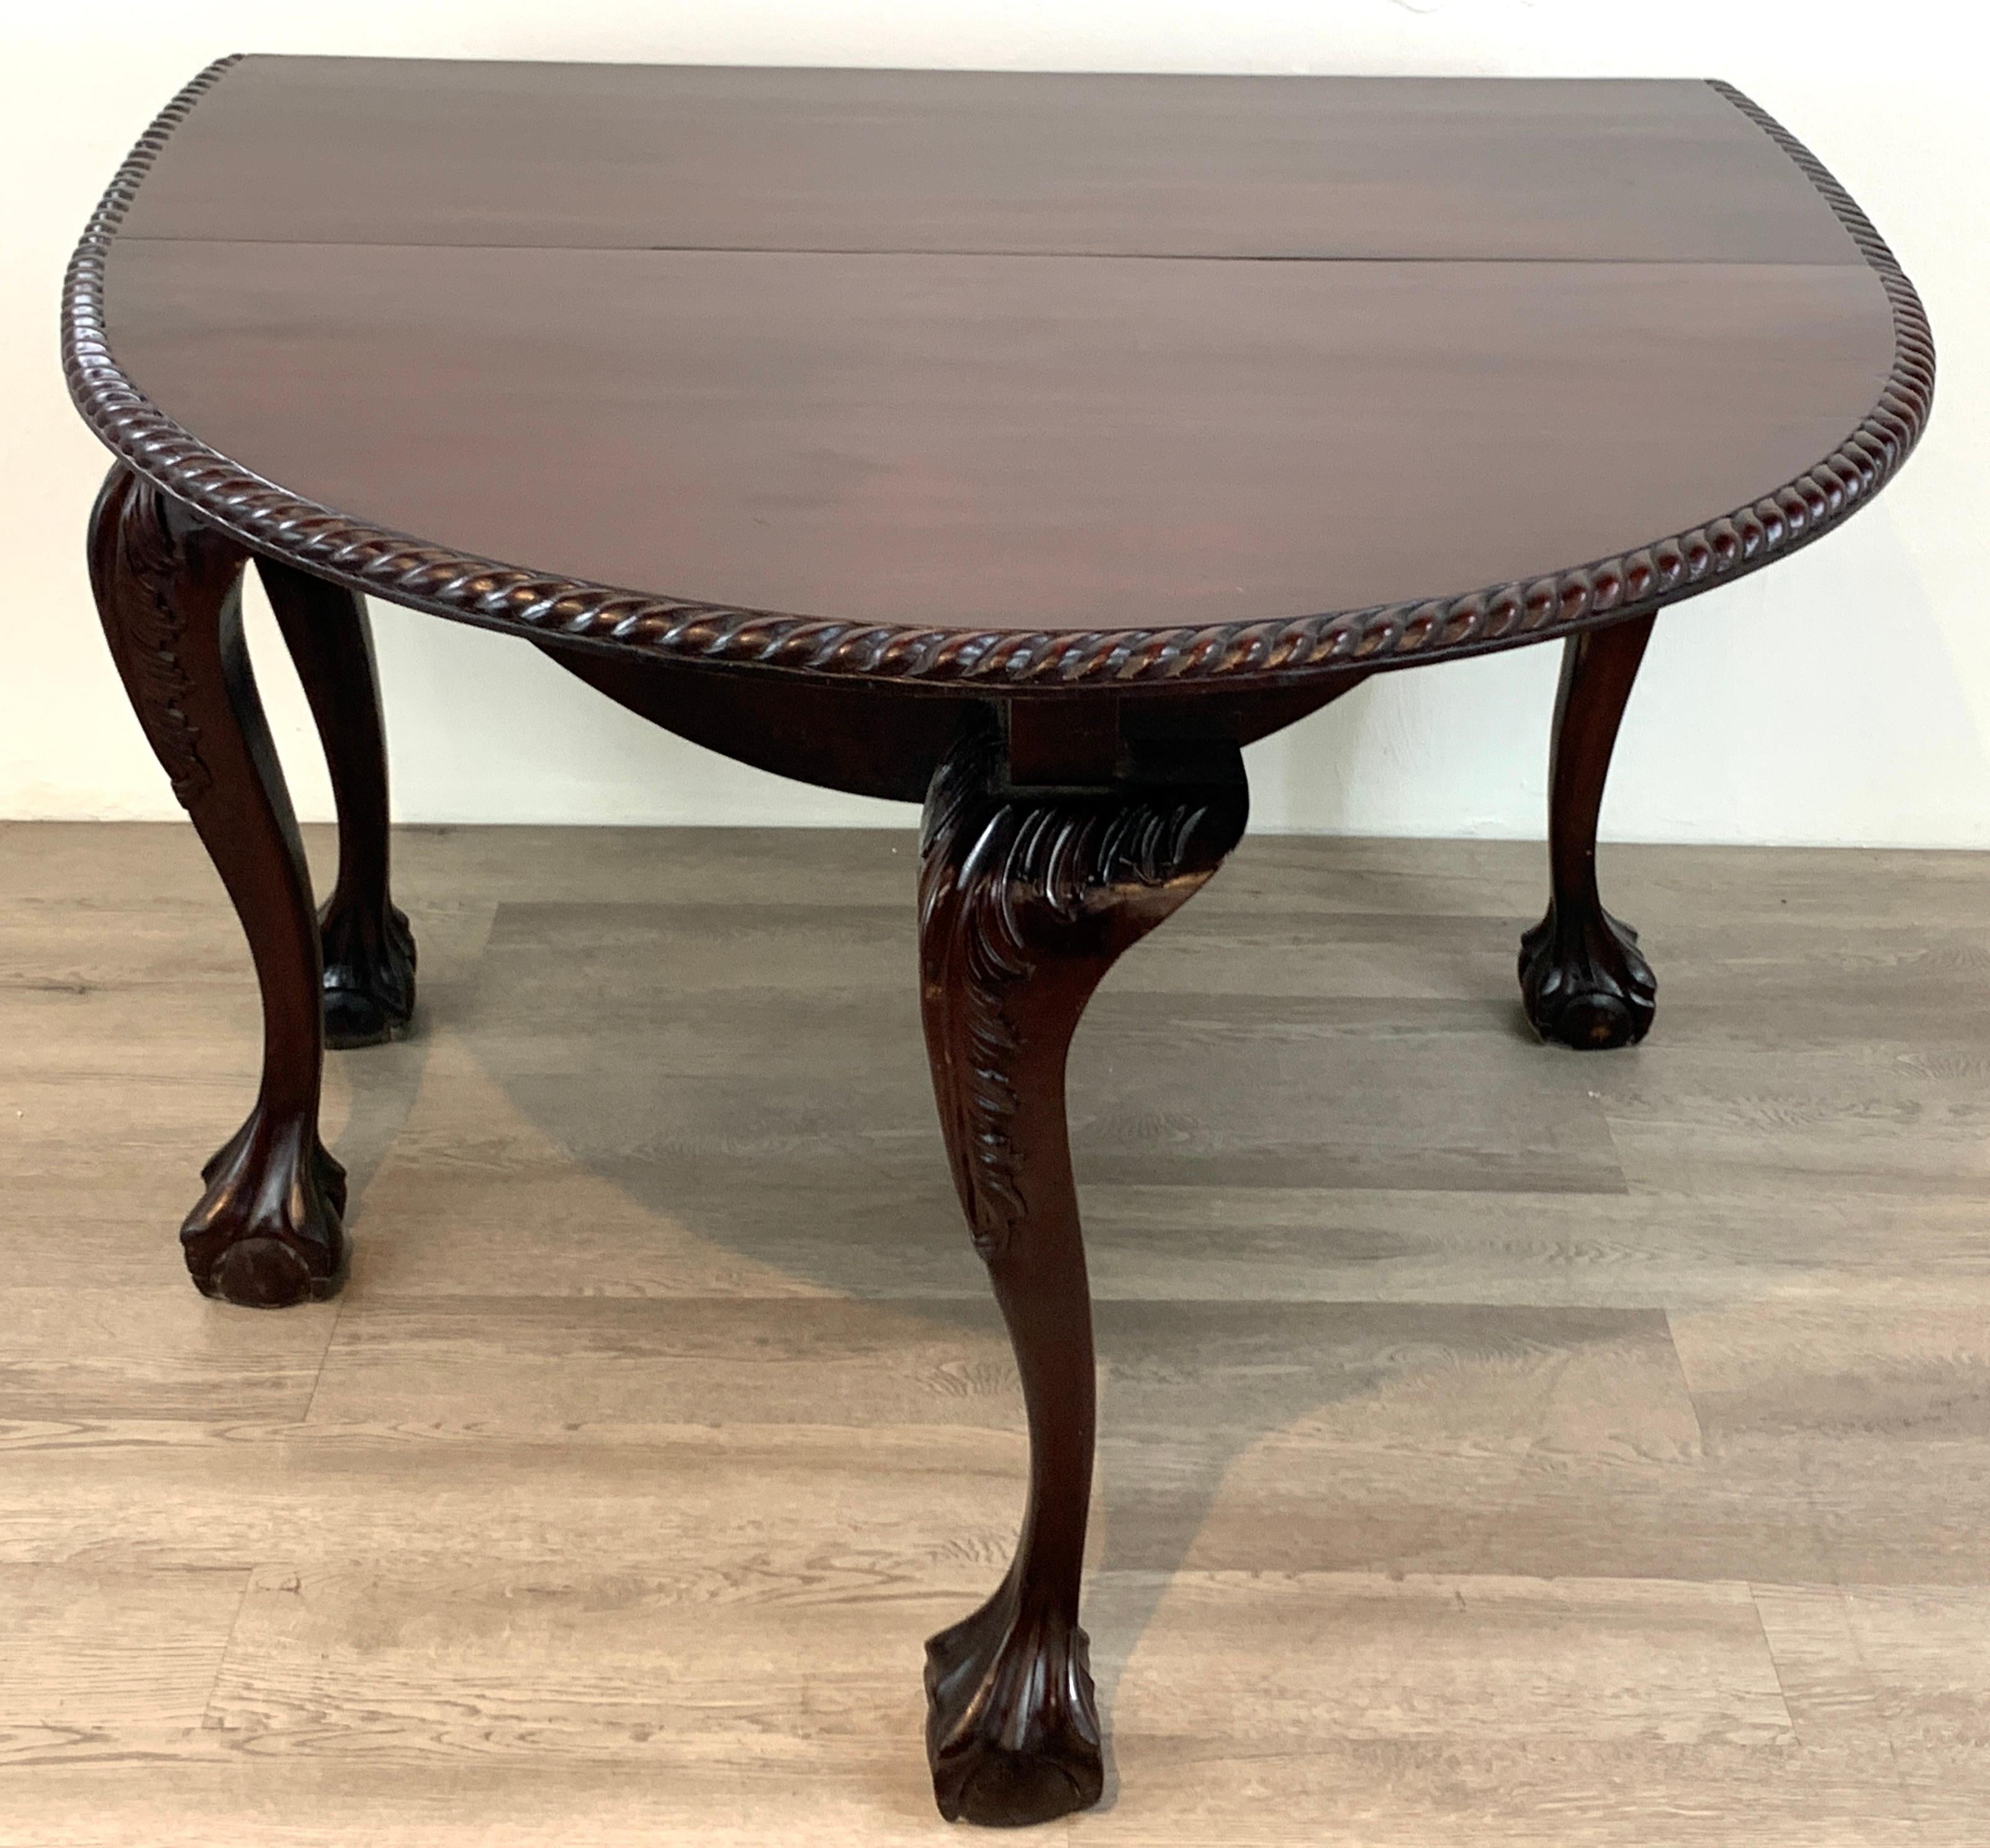 19th Century English Mahogany Ball & Claw Foot Tuck Away Dining Room Table In Good Condition For Sale In Atlanta, GA